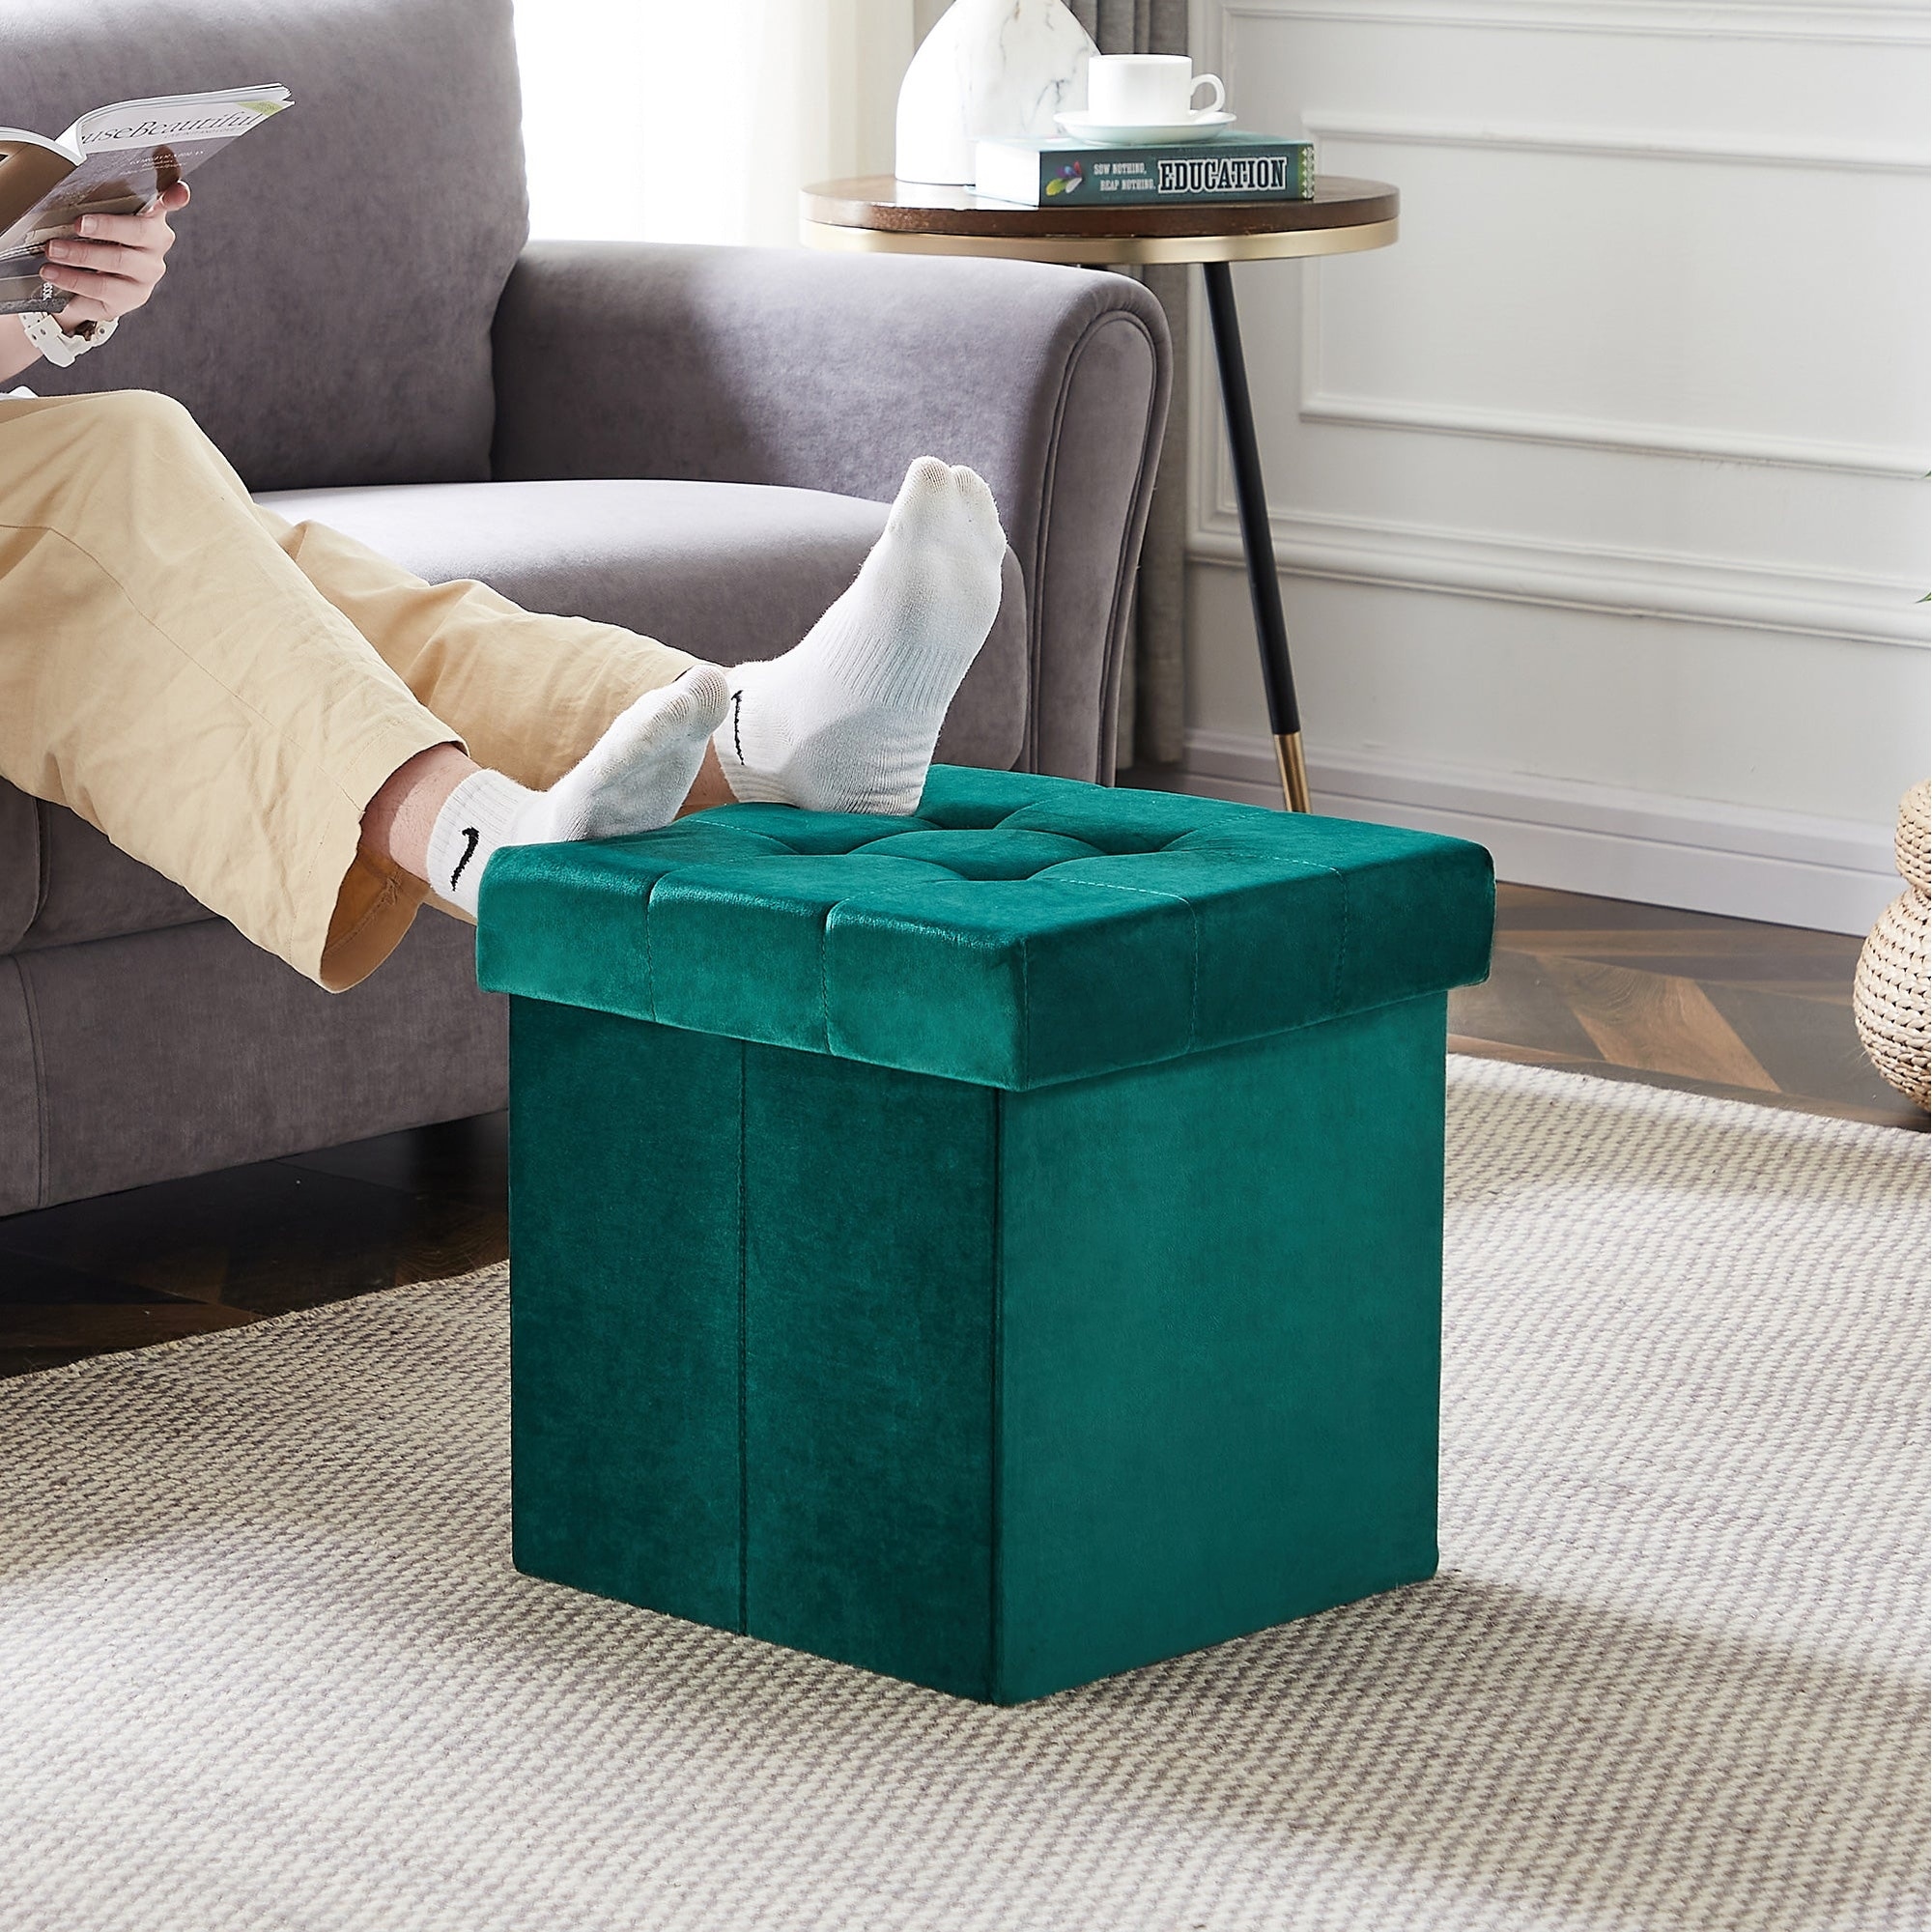 https://ak1.ostkcdn.com/images/products/is/images/direct/79ff8d1656974b72ed68ffdcaf6be78cb63a6974/Javlergo-Square-Storage-Ottoman-Modern-Folding-Tufted-Foot-Rest-Stool.jpg